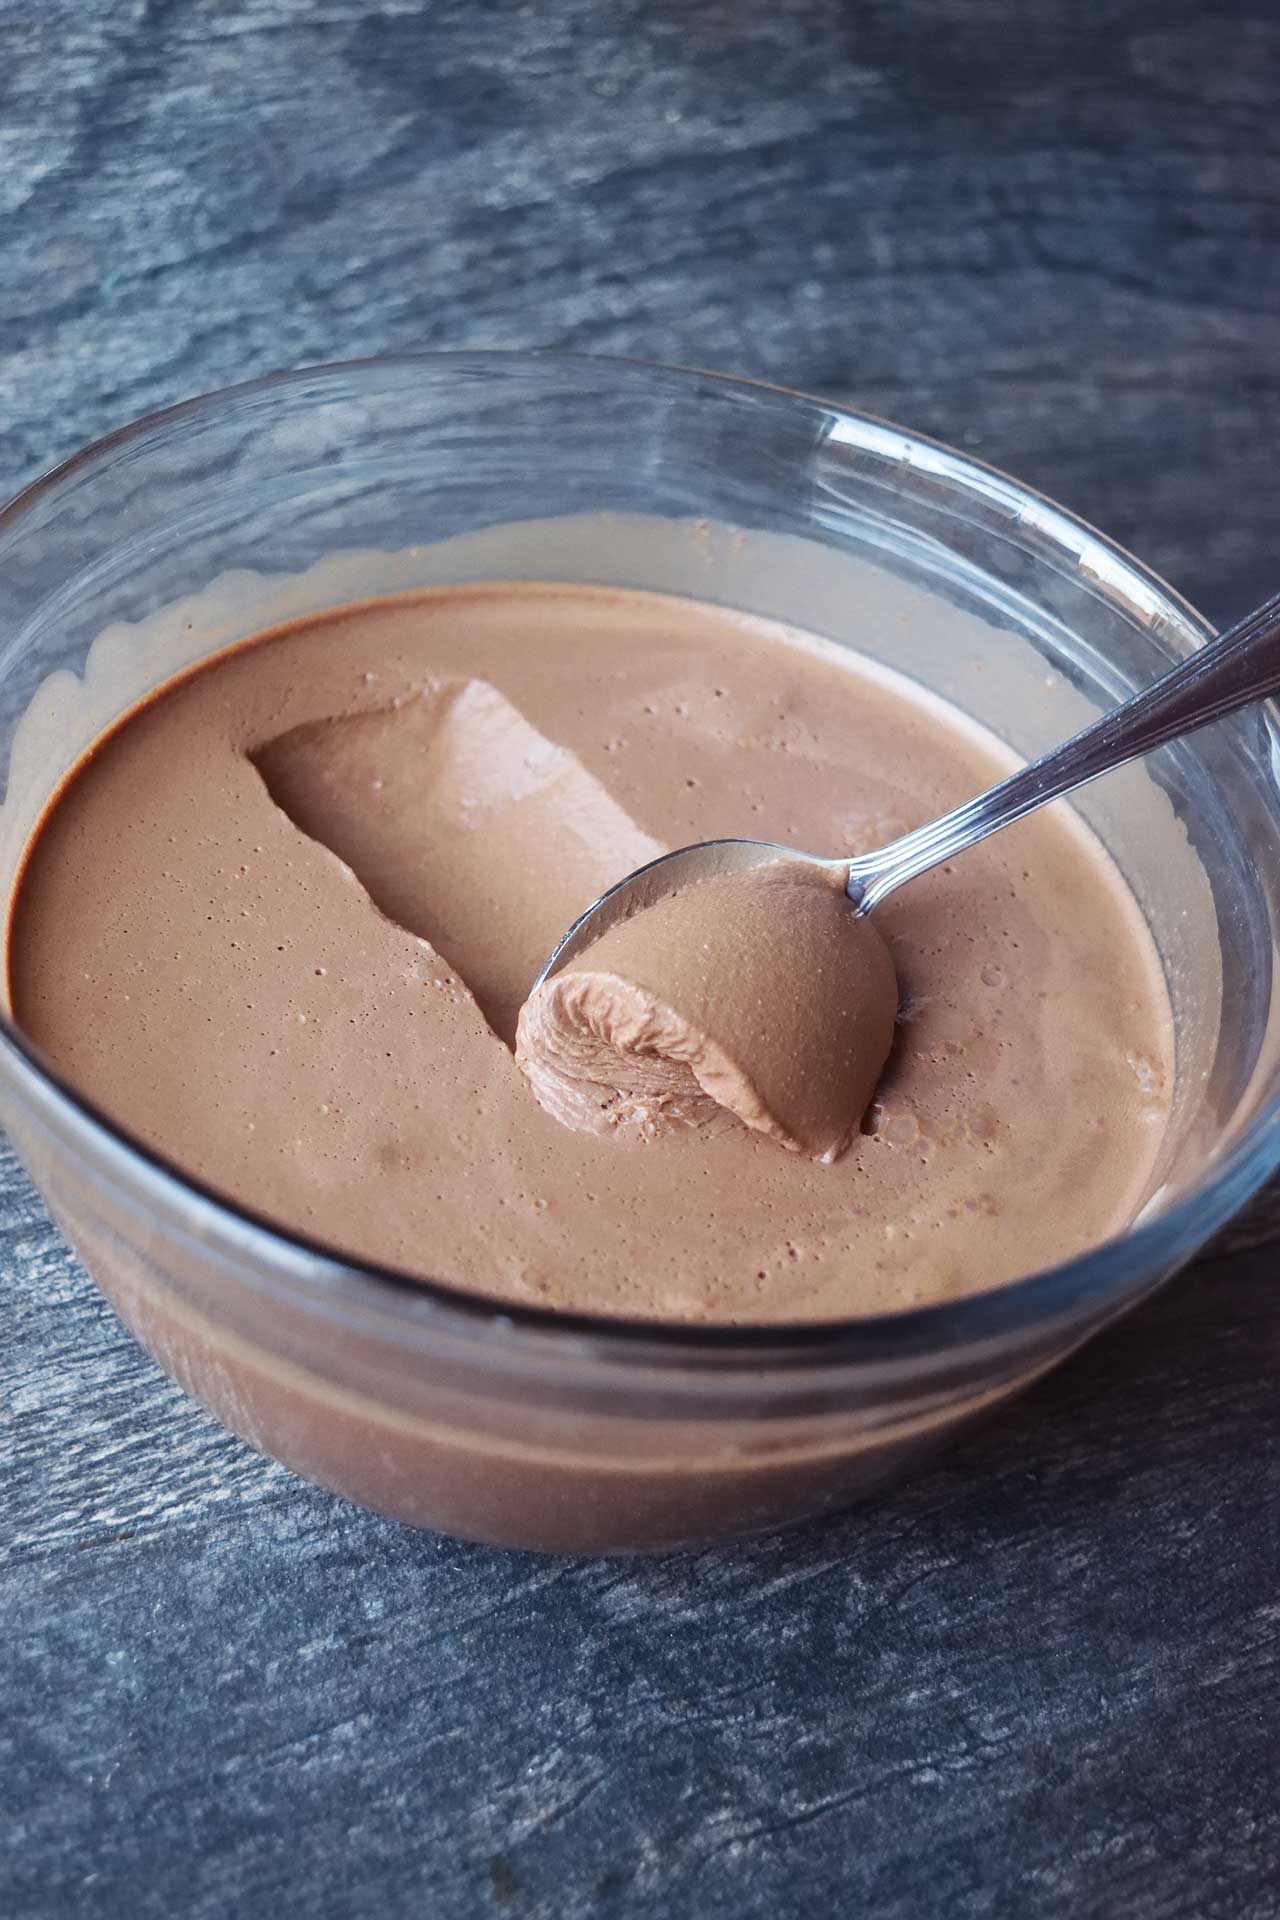 A side view of spoon scooping up chocolate mousse out of a glass bowl.